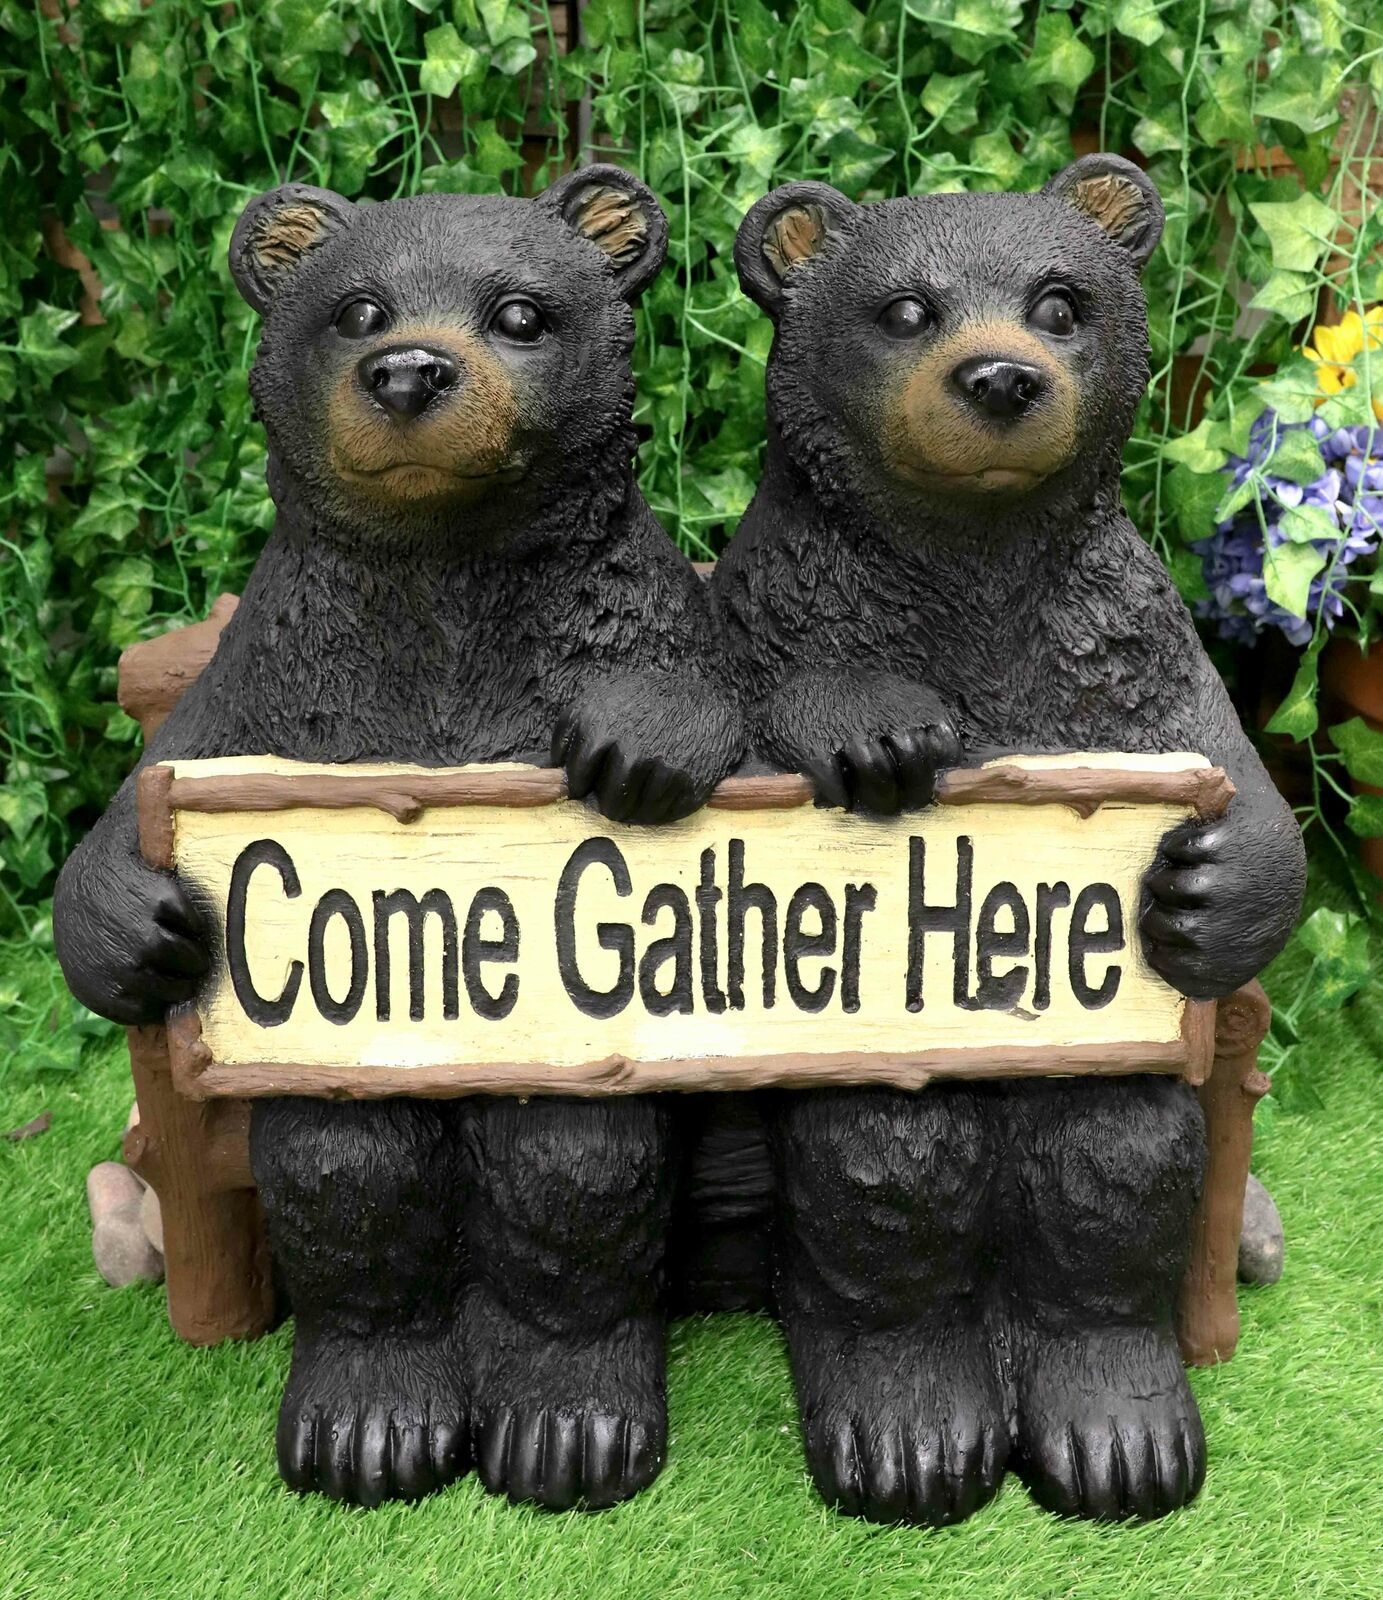 Large 21L Rustic Forest Twin Black Bears On Park Bench Holding Sign Statue